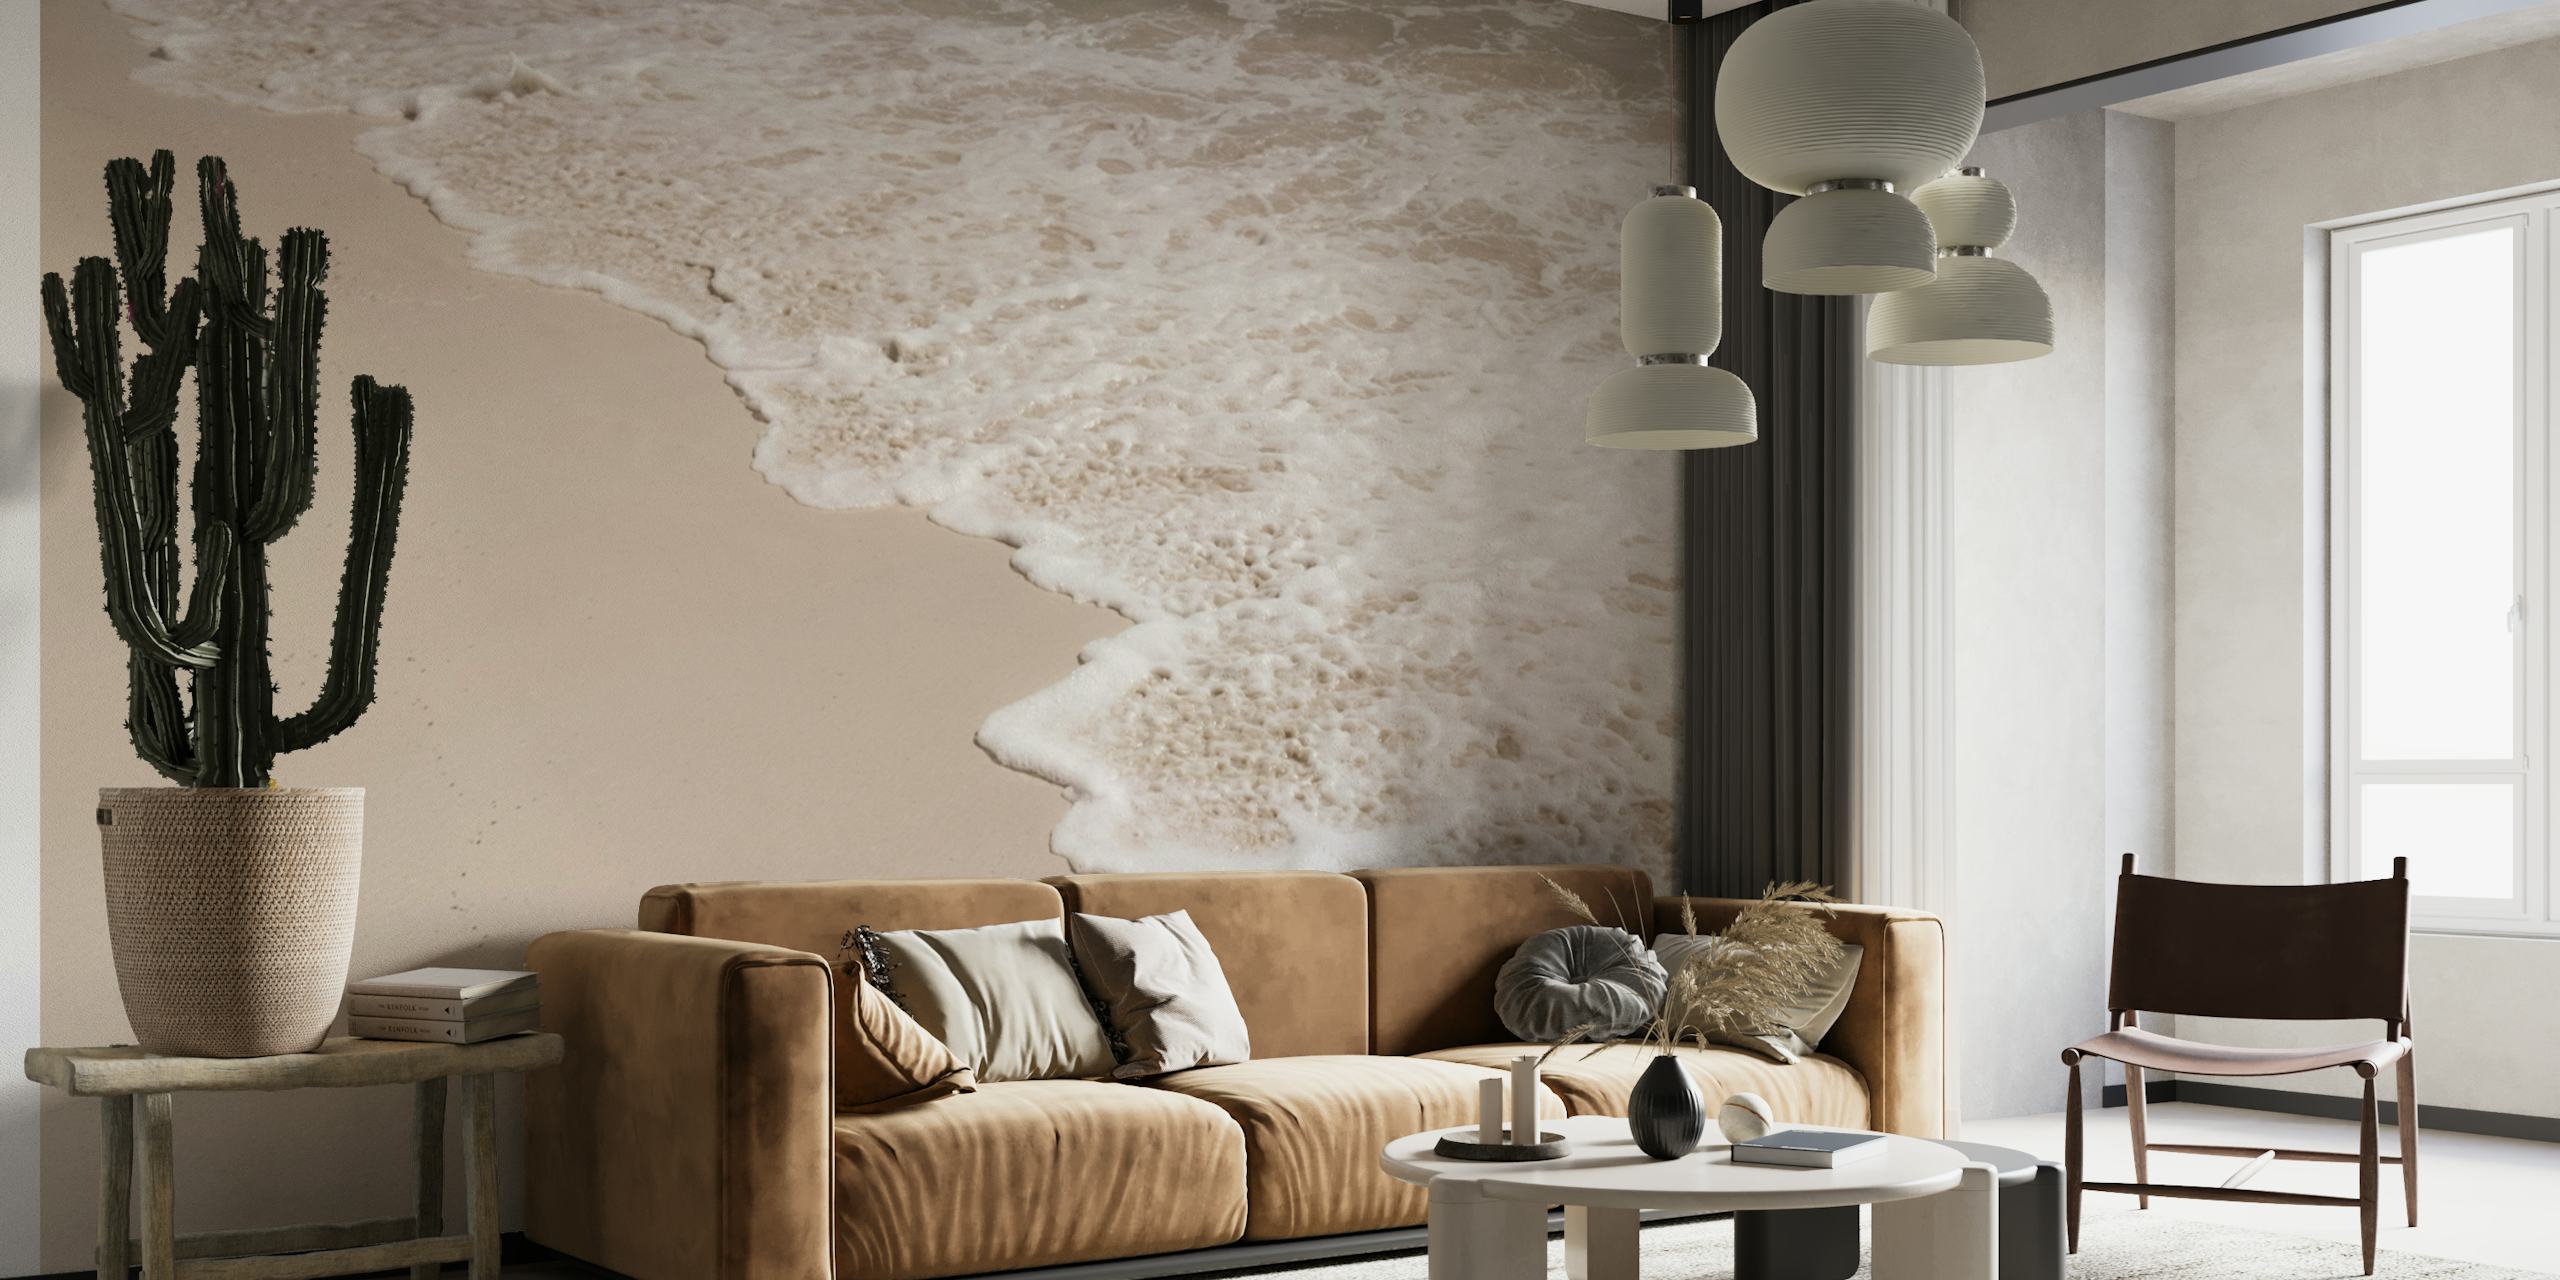 Gentle waves lapping over a sandy shore in the 'Caribbean Sea Foam Dream 2' wall mural.